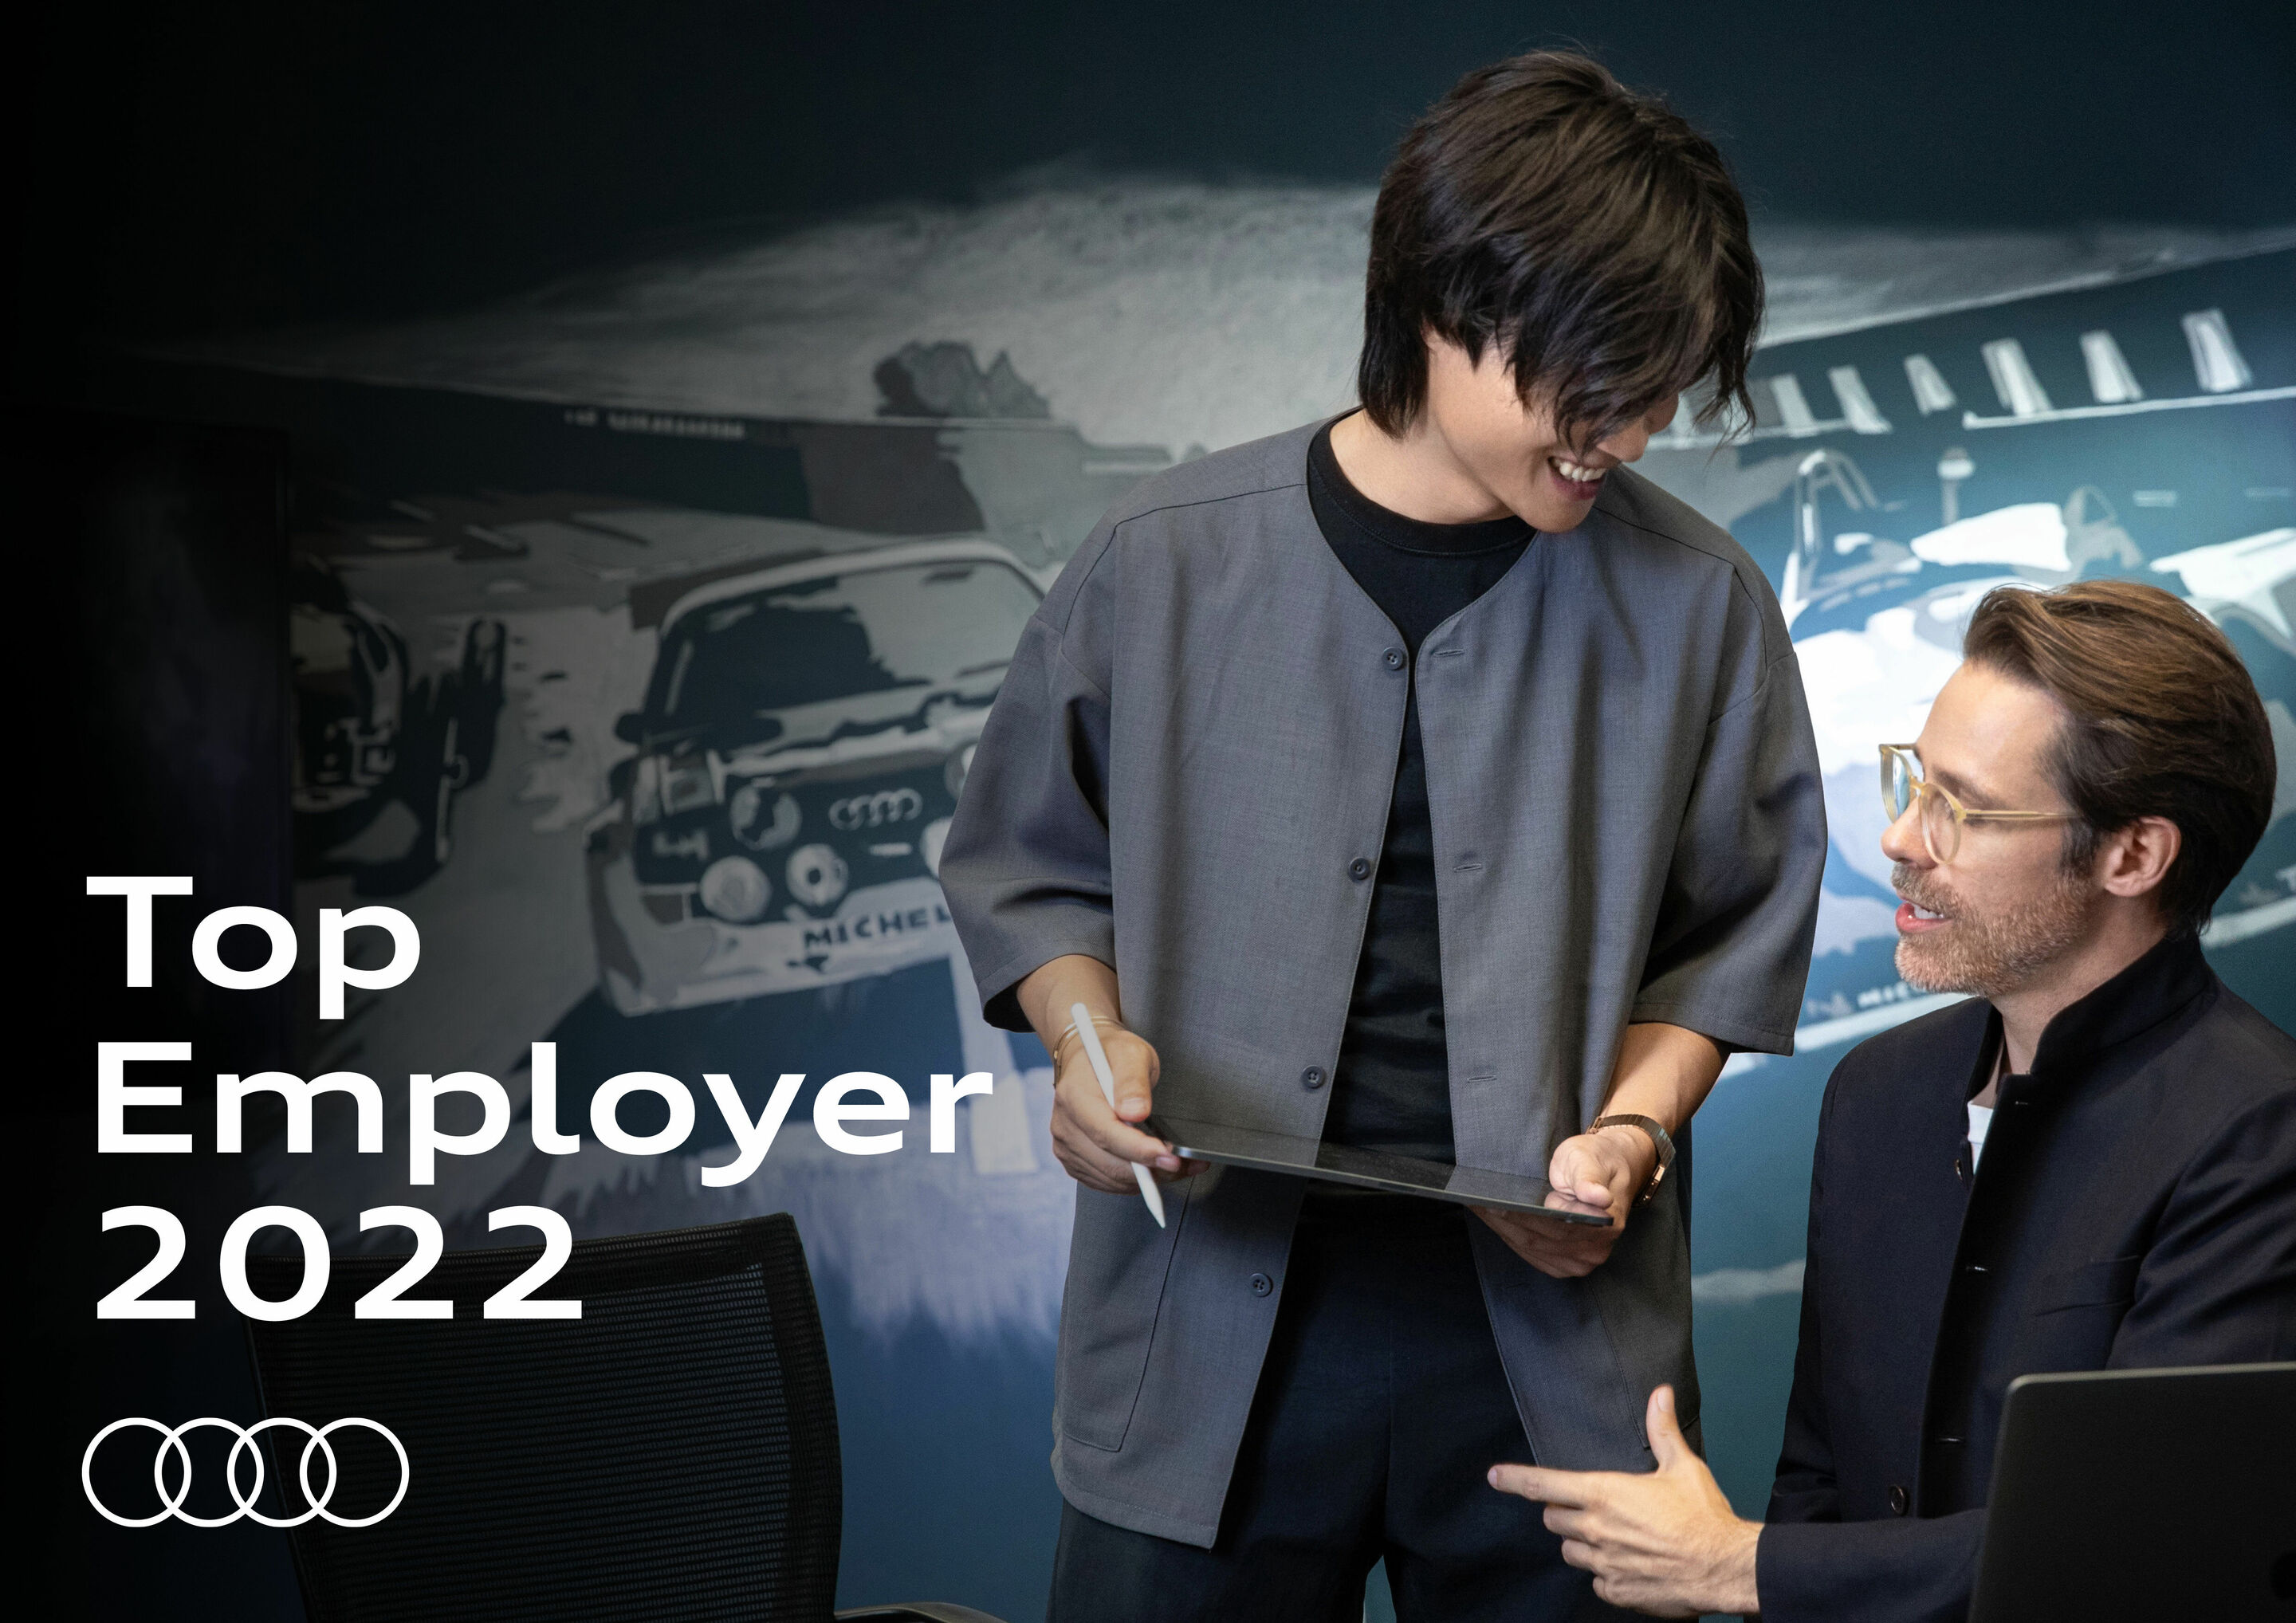 Audi is again a Top Employer in 2022